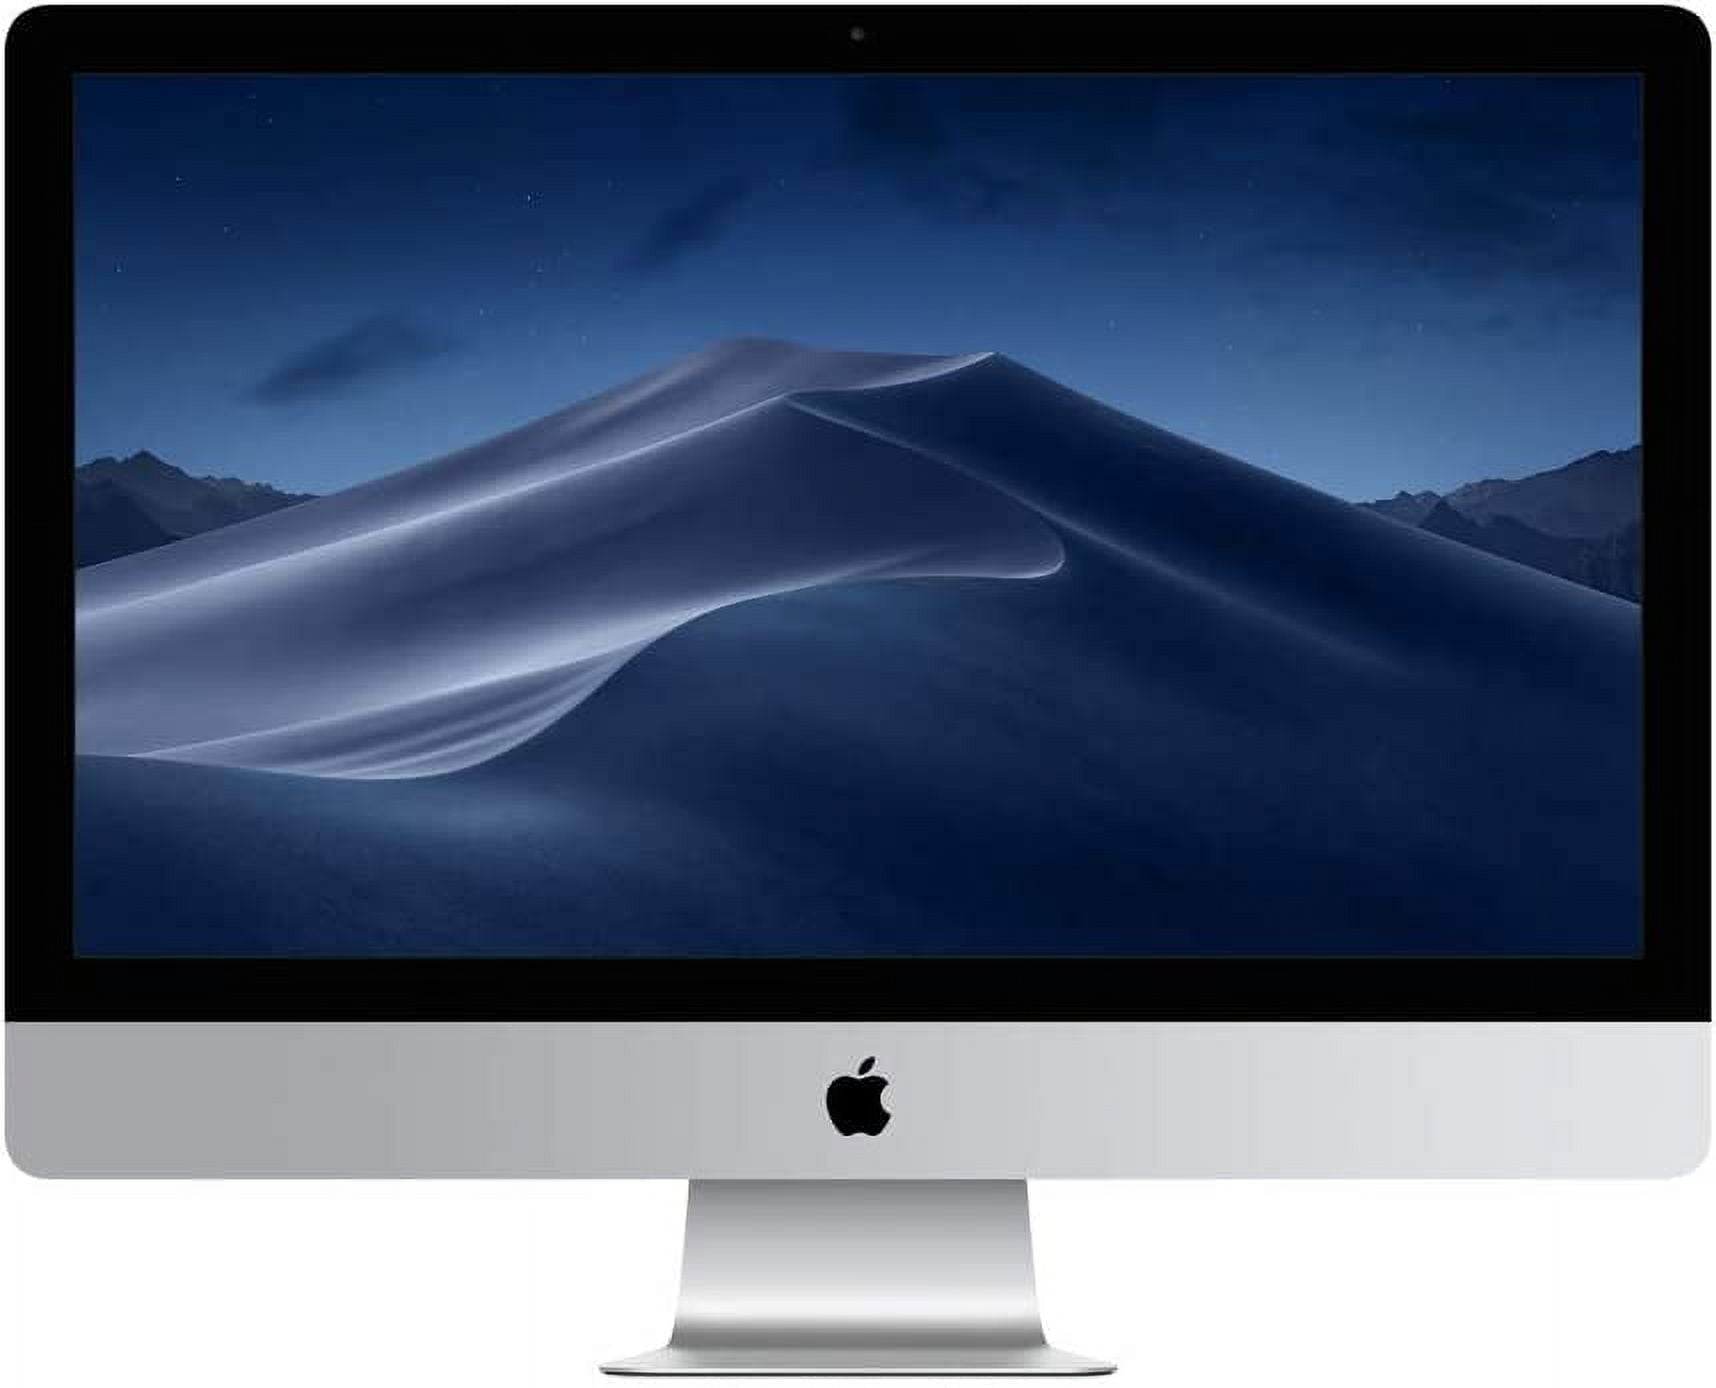 Apple A Grade Desktop Computer iMac 27-inch Retina (Mid-2017) Core i7  4.2GHz 16GB 1TB SSD 5120 x 2880 Display Hi Sierra Keyboard and Mouse (Used)